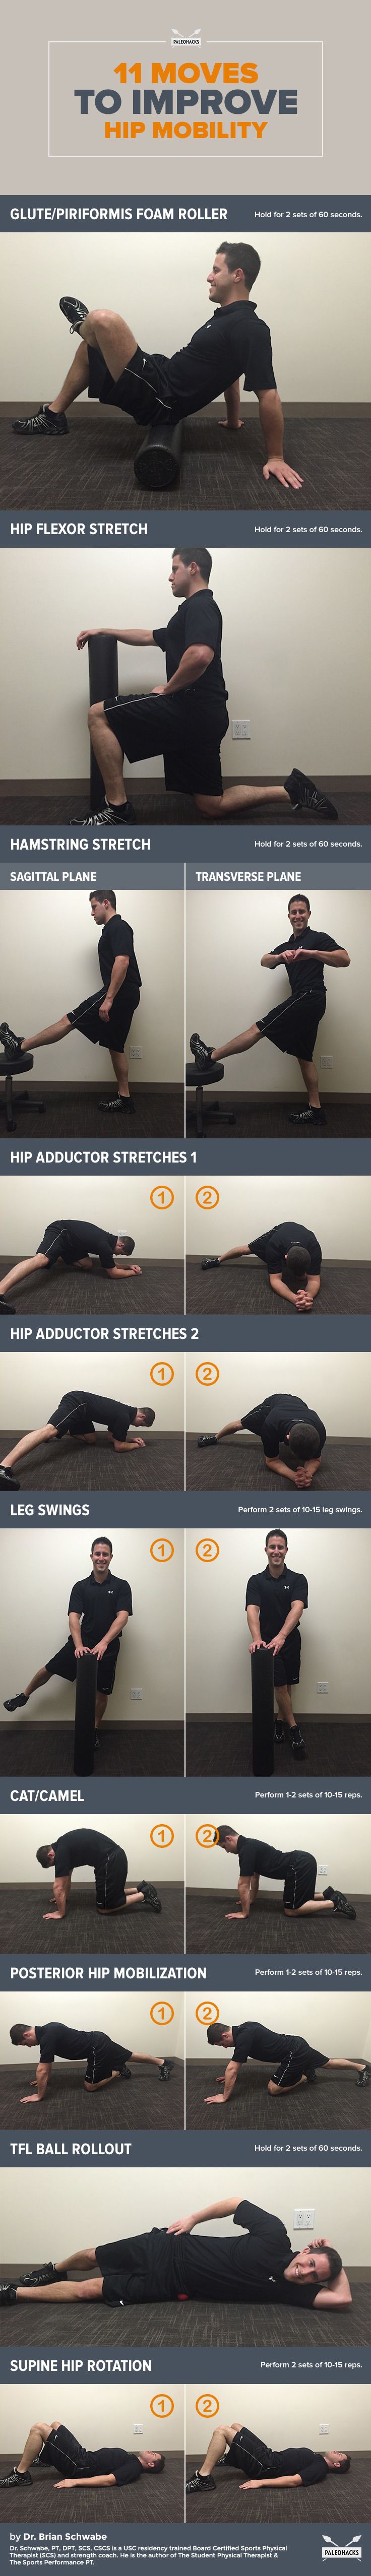 11-Moves-to-Improve-Hip-Mobility-infographic